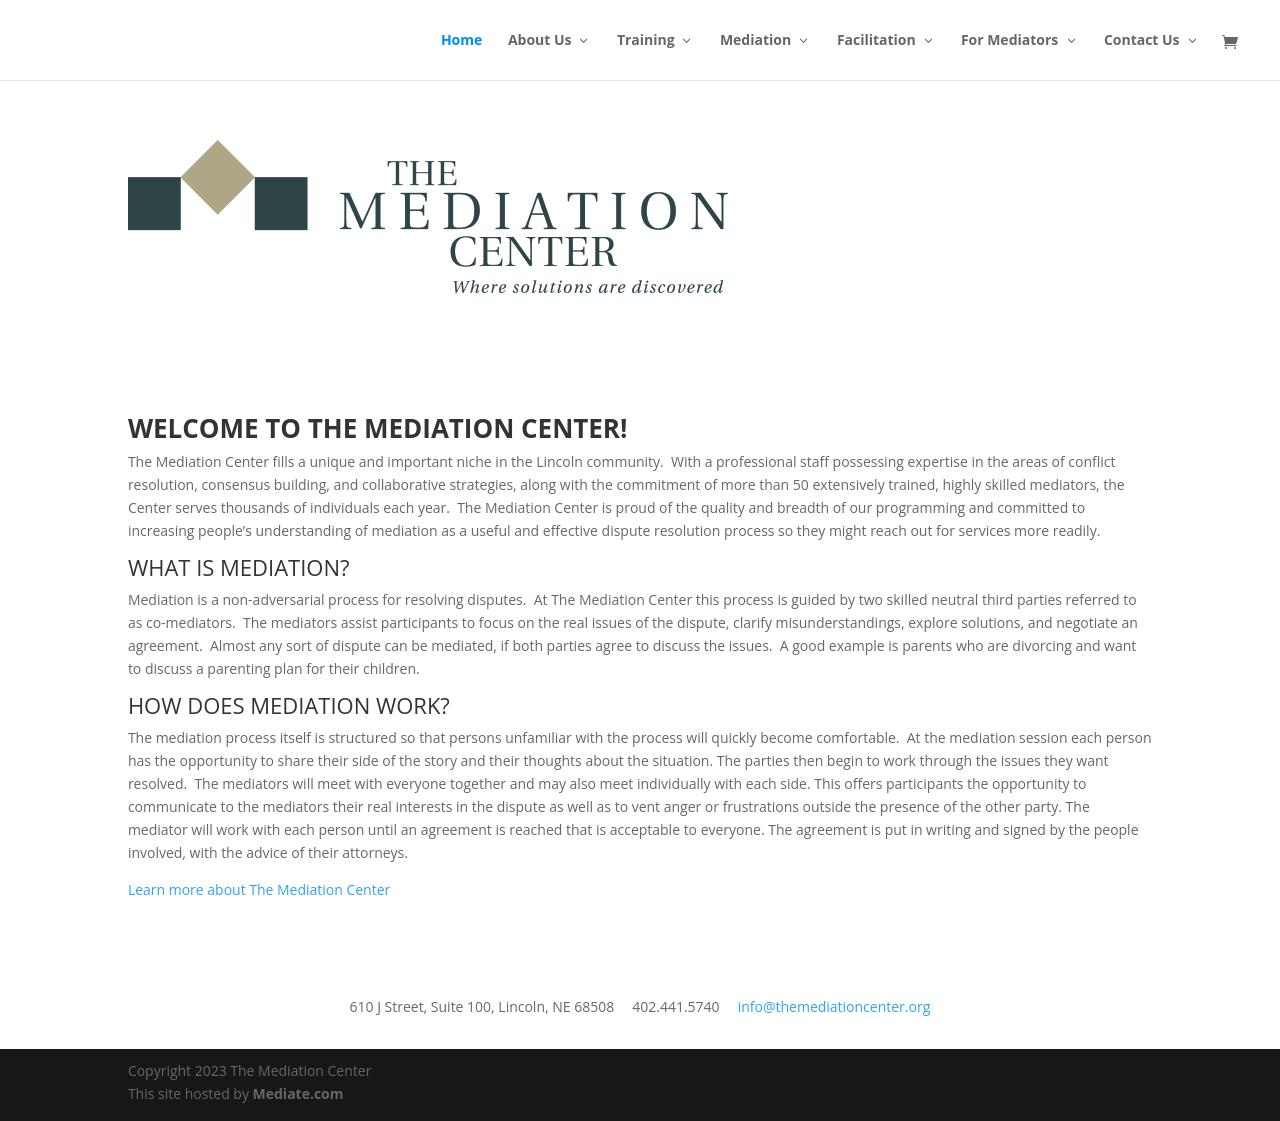 Mediation Center The - Lincoln NE Lawyers